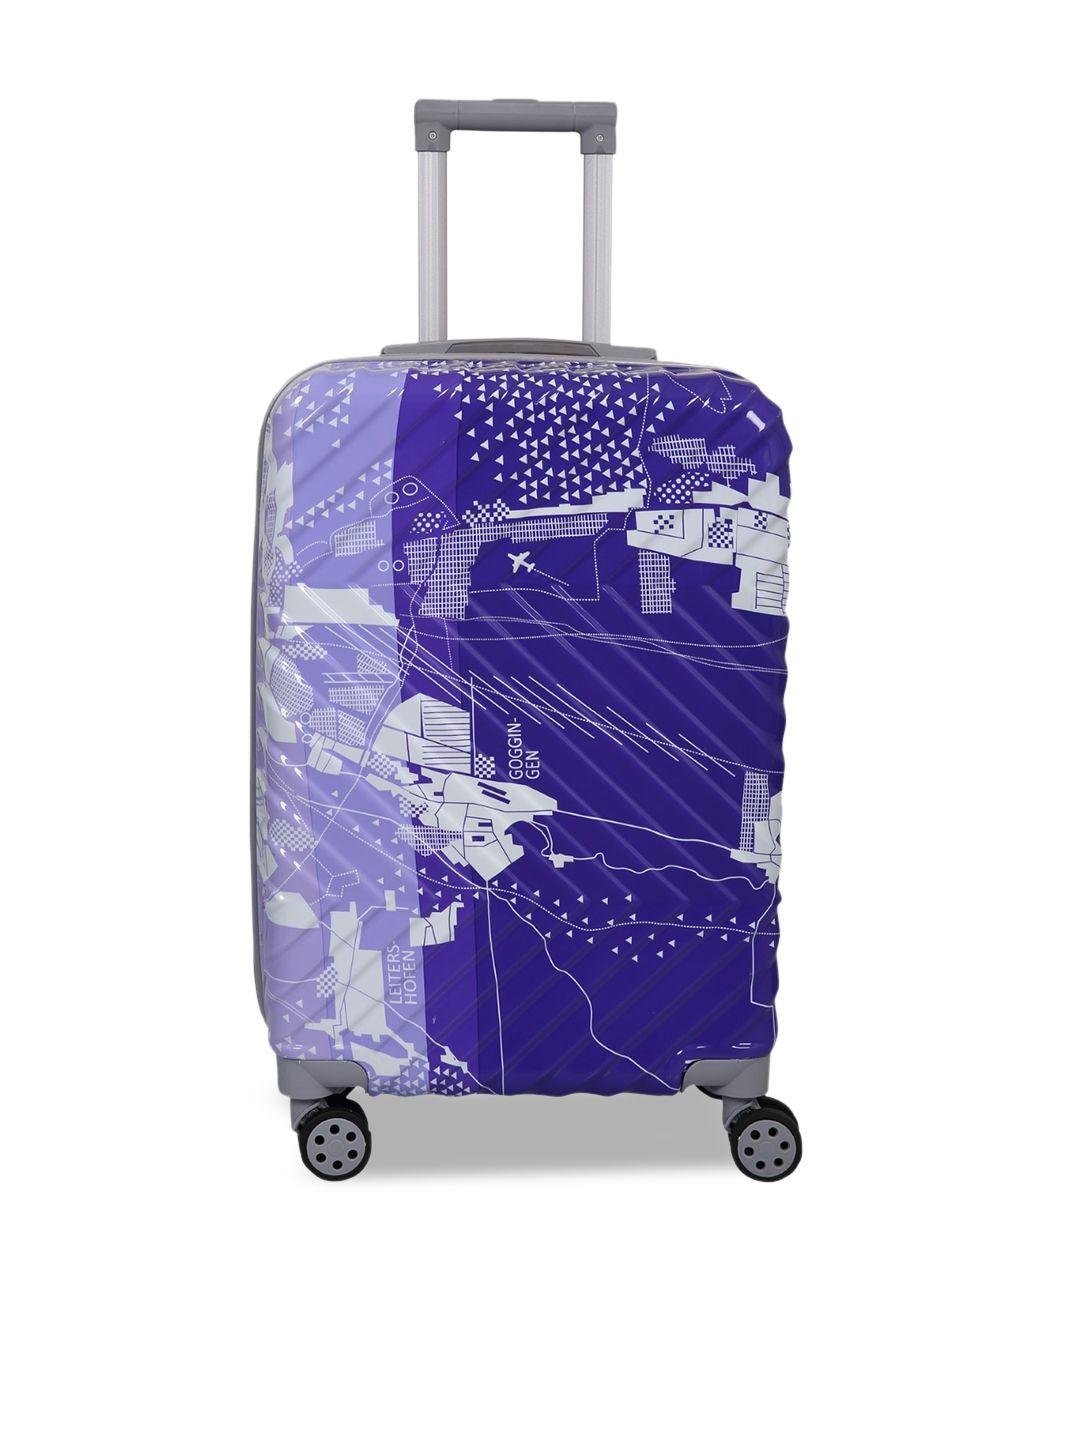 polo class blue & white printed textured hard-sided large suitcase trolley bag 72 l